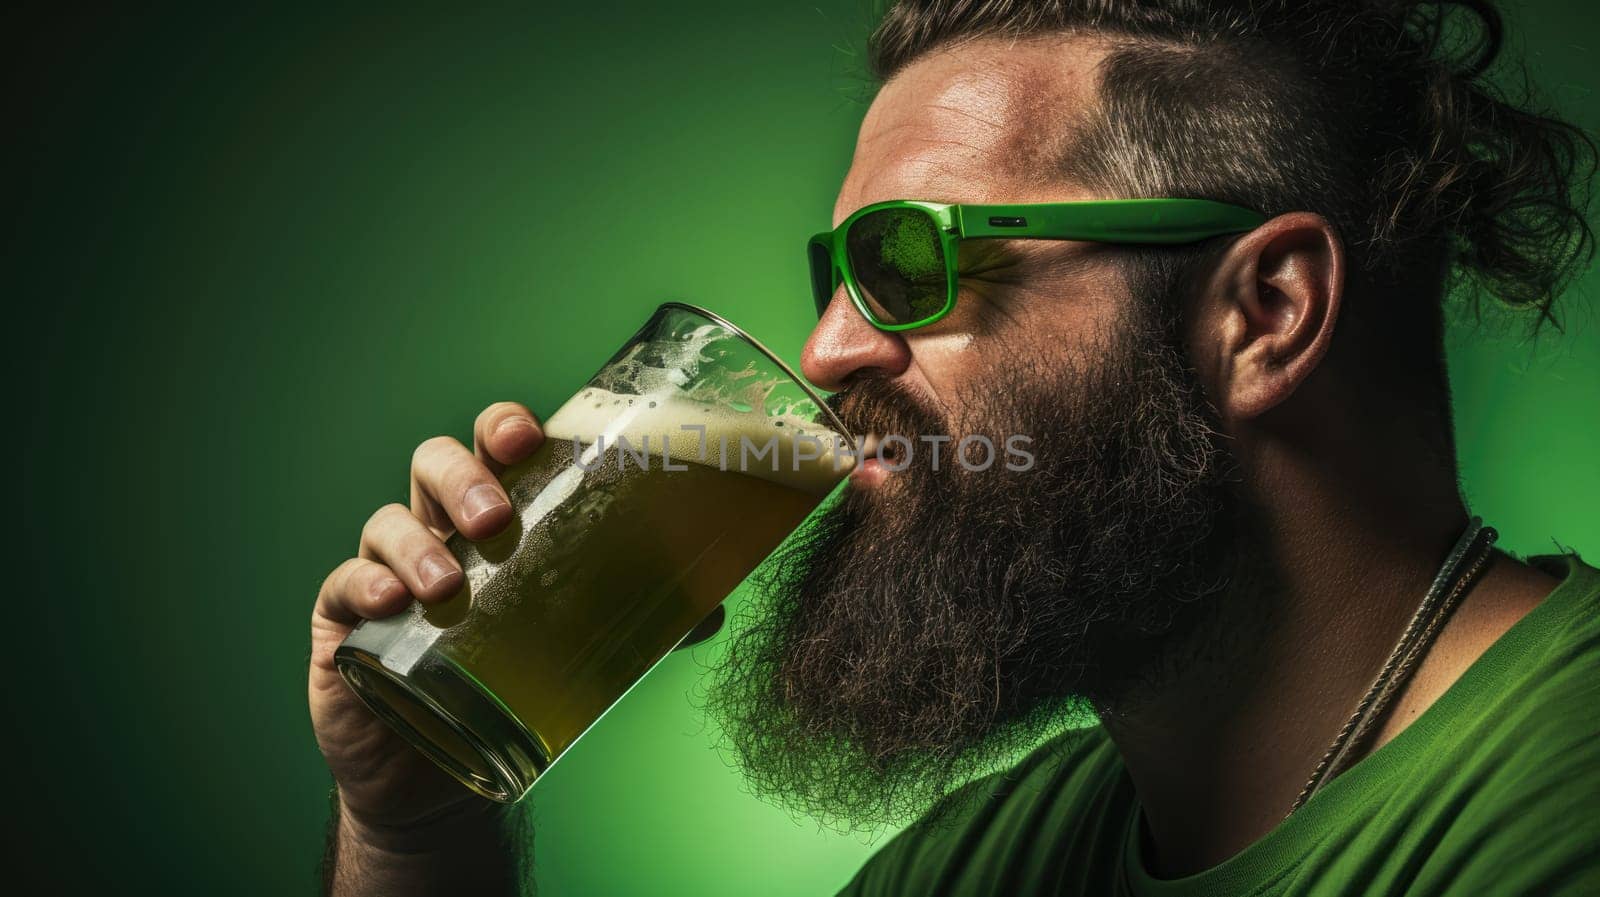 The bearded man with a bun hairstyle looks focused as he holds a green beer mug. He exudes a sense of calm and confidence. The dark grey backdrop enhances the mysterious vibe of the scene.